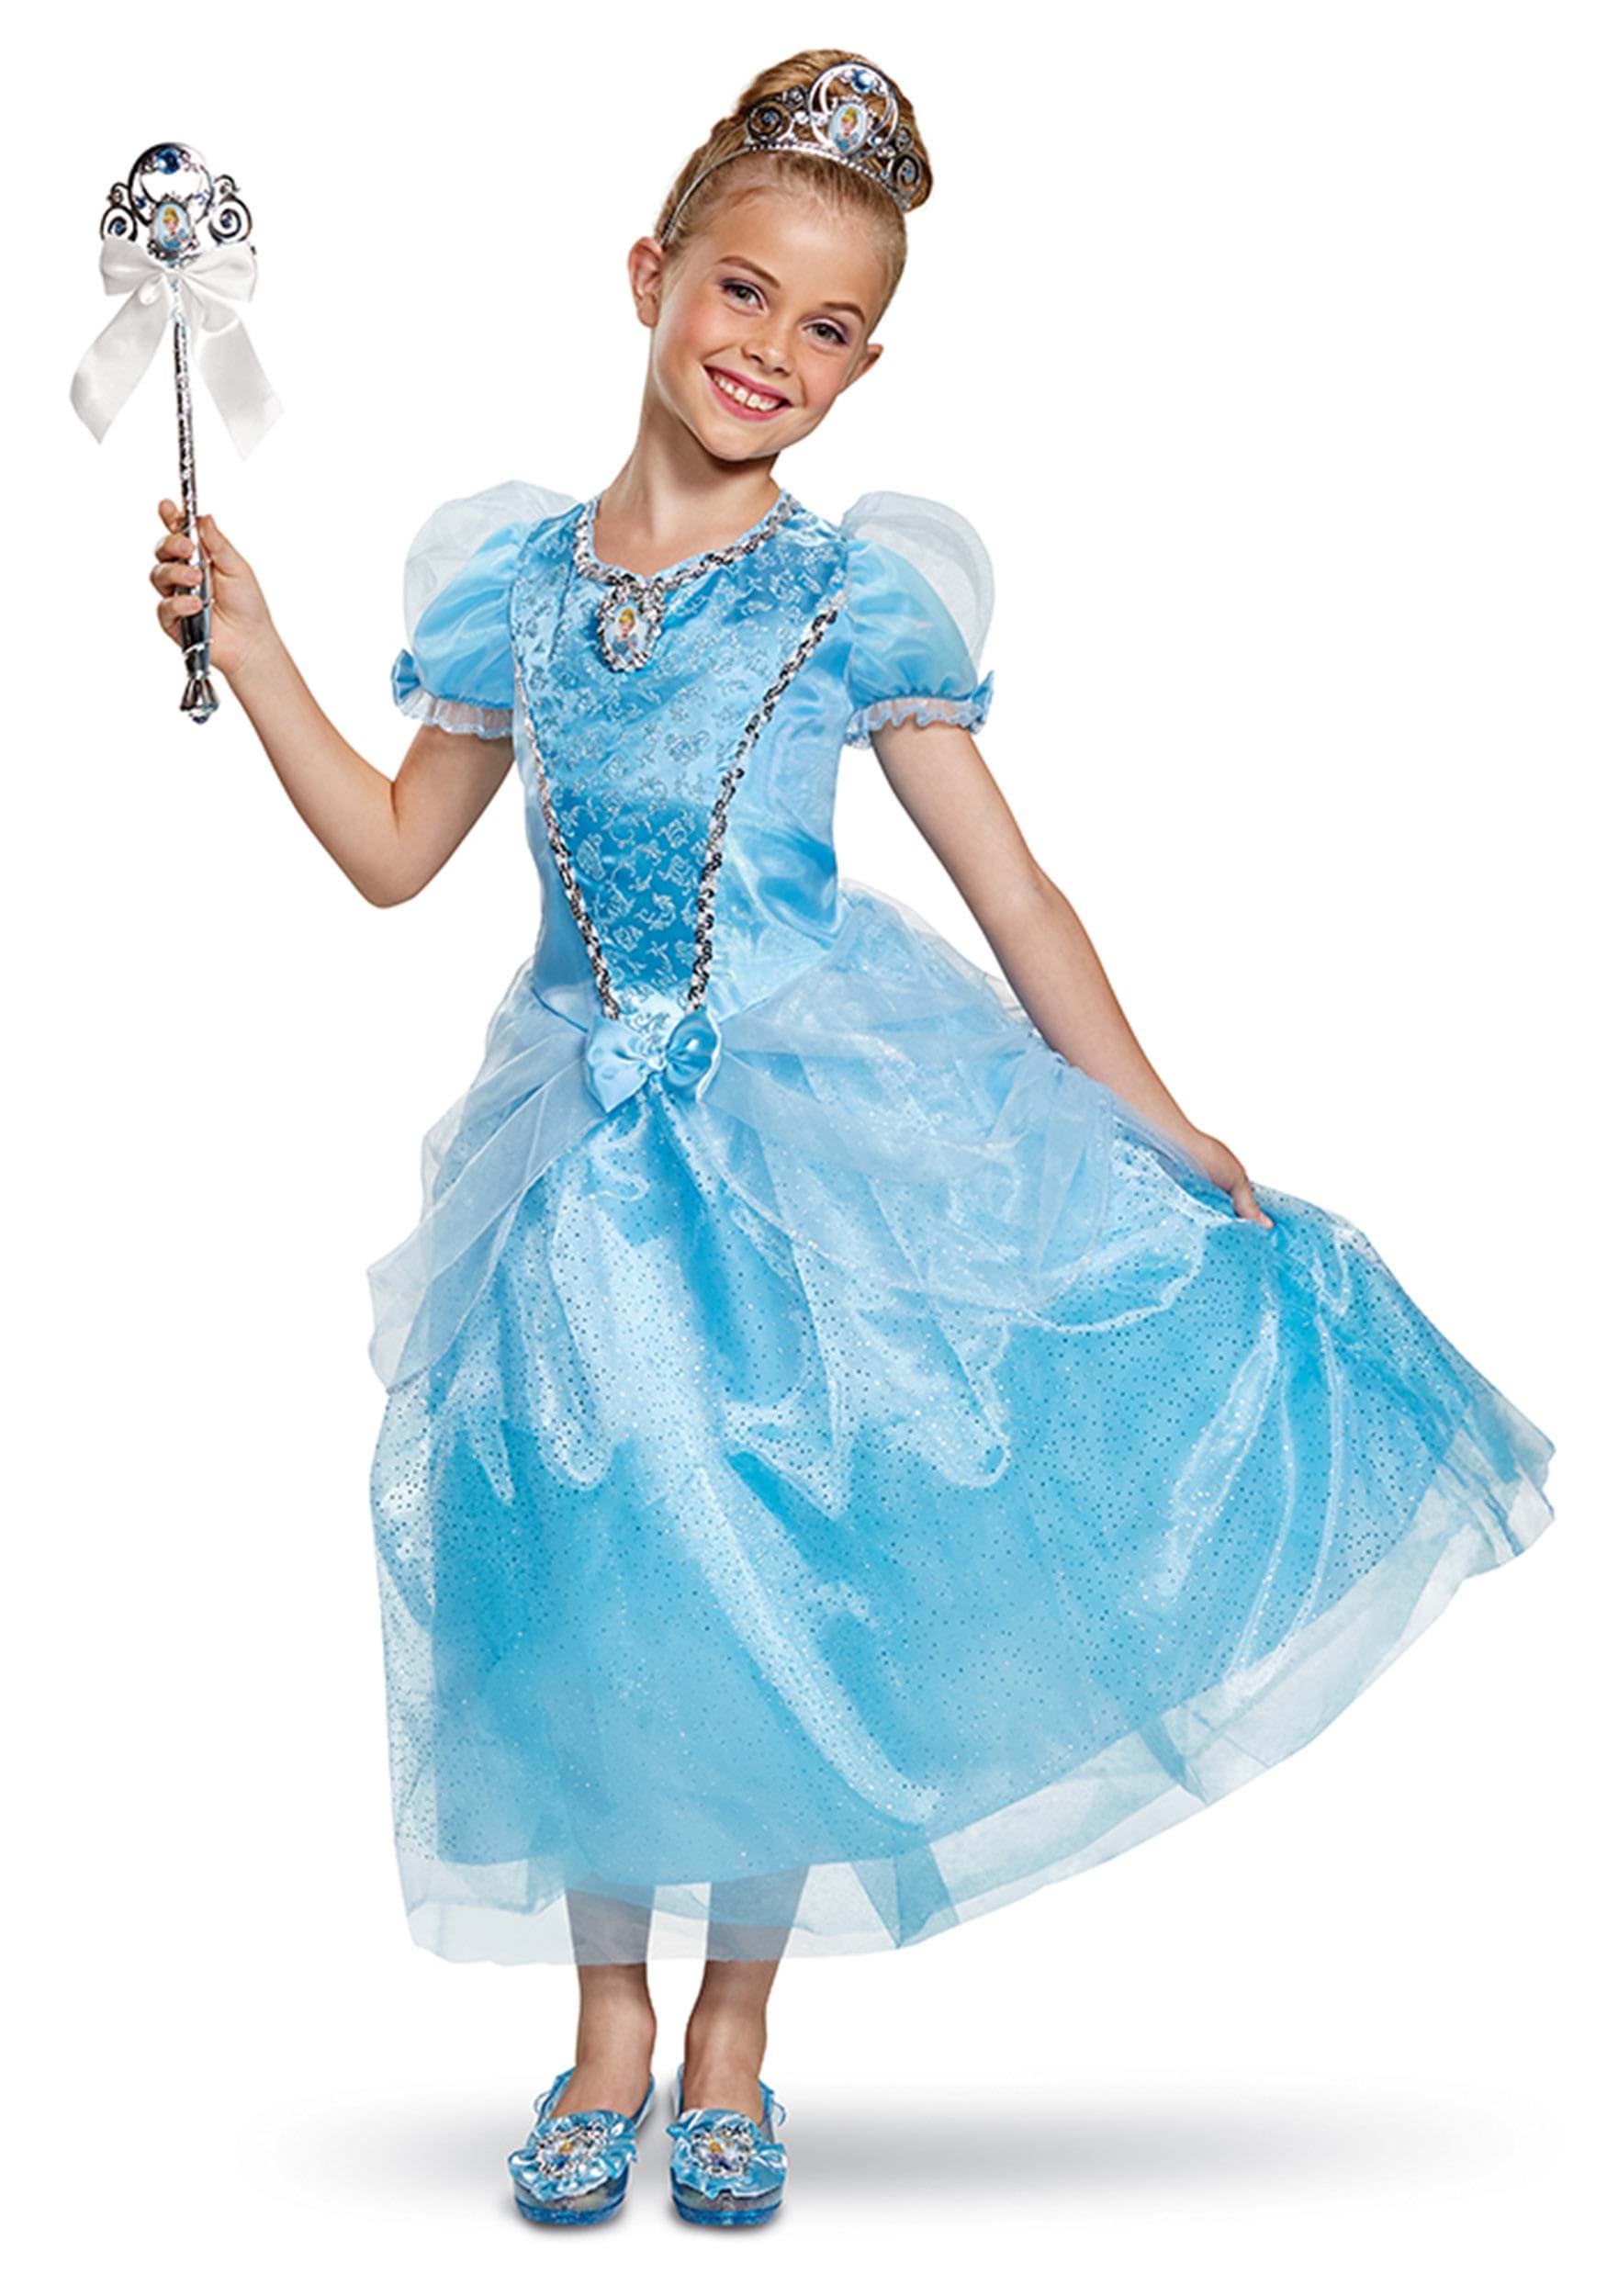 Photos - Fancy Dress Deluxe Disguise Kid's Cinderella  Costume Blue/Gray DI67013 